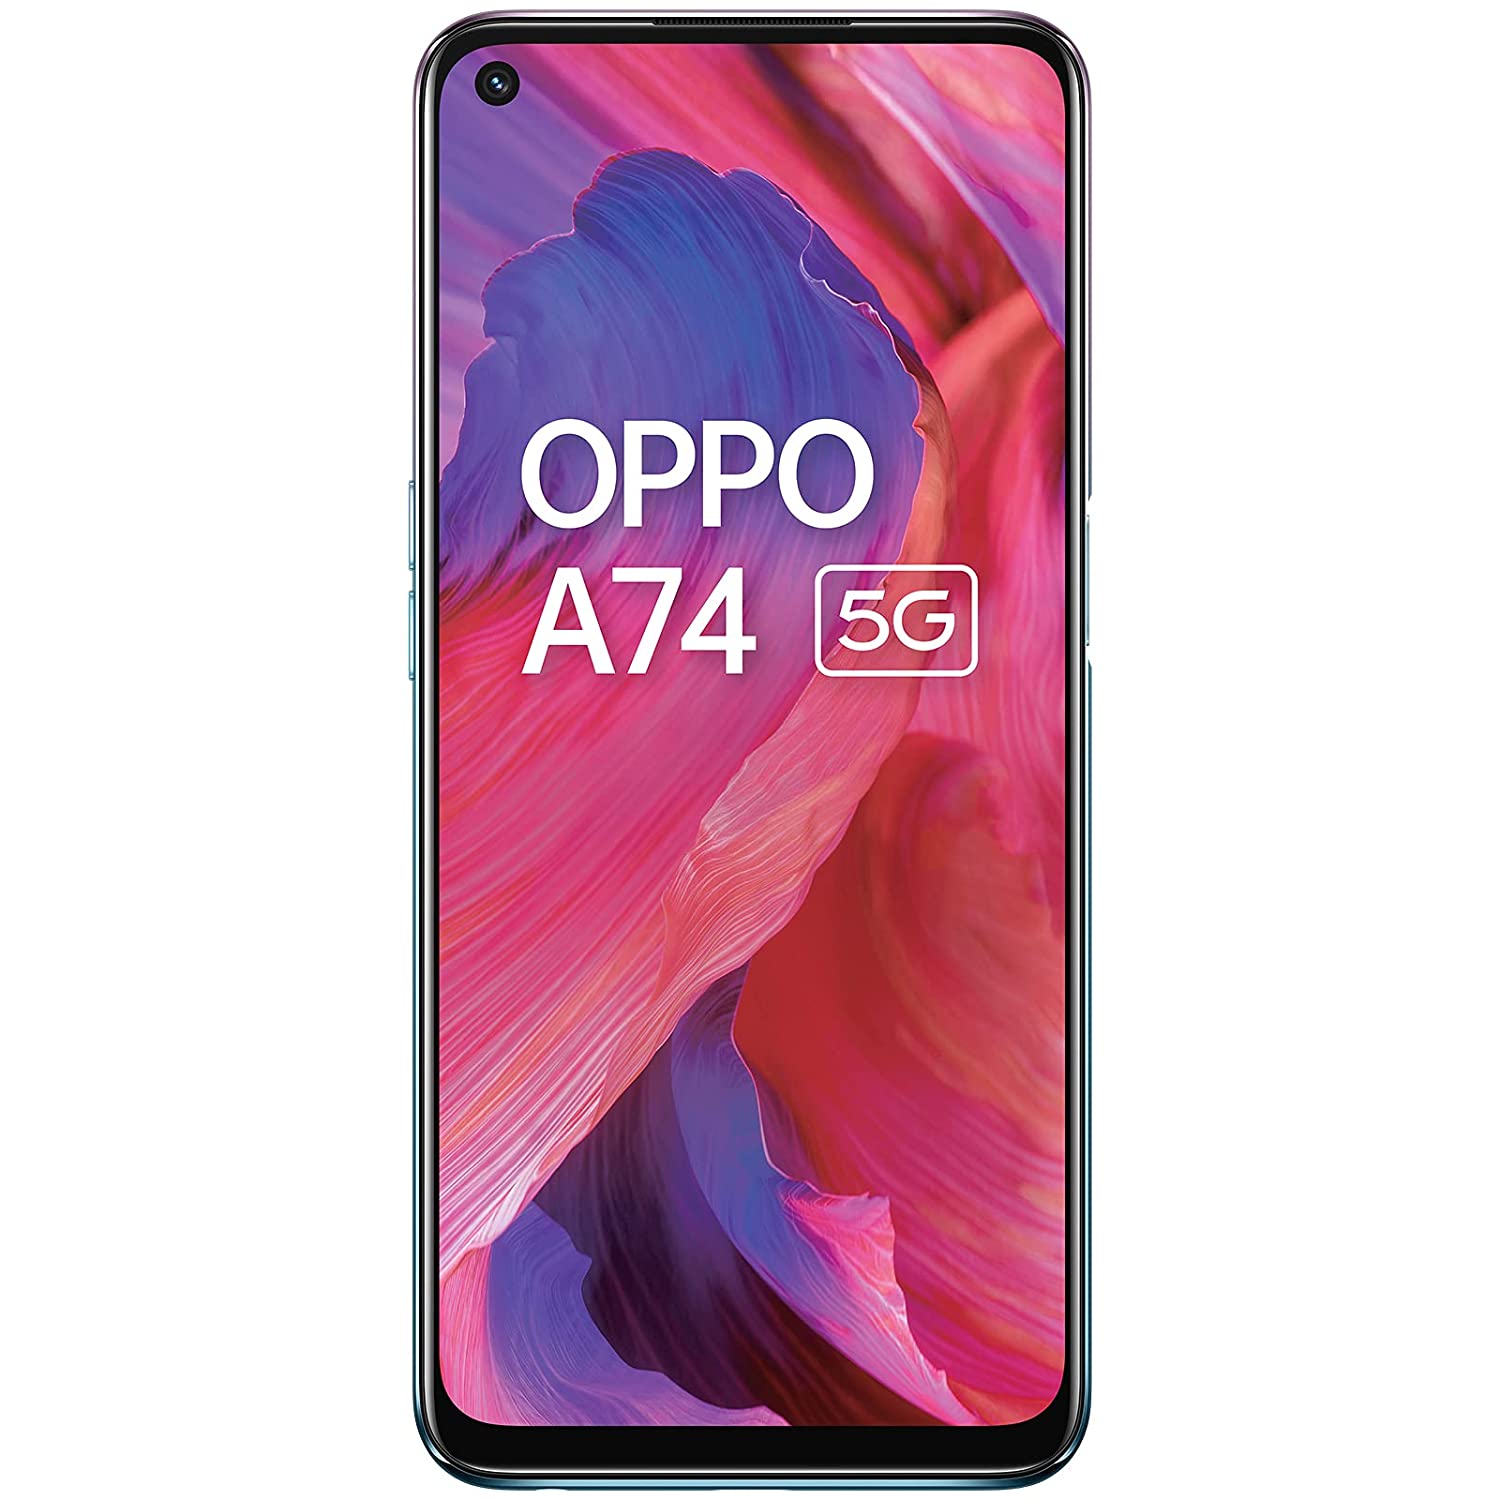  Buy OPPO A74 5G (Fluid Black,6GB RAM,128GB Storage) - 5G Android Smartphone | 5000 mAh Battery | 18W Fast Charge 